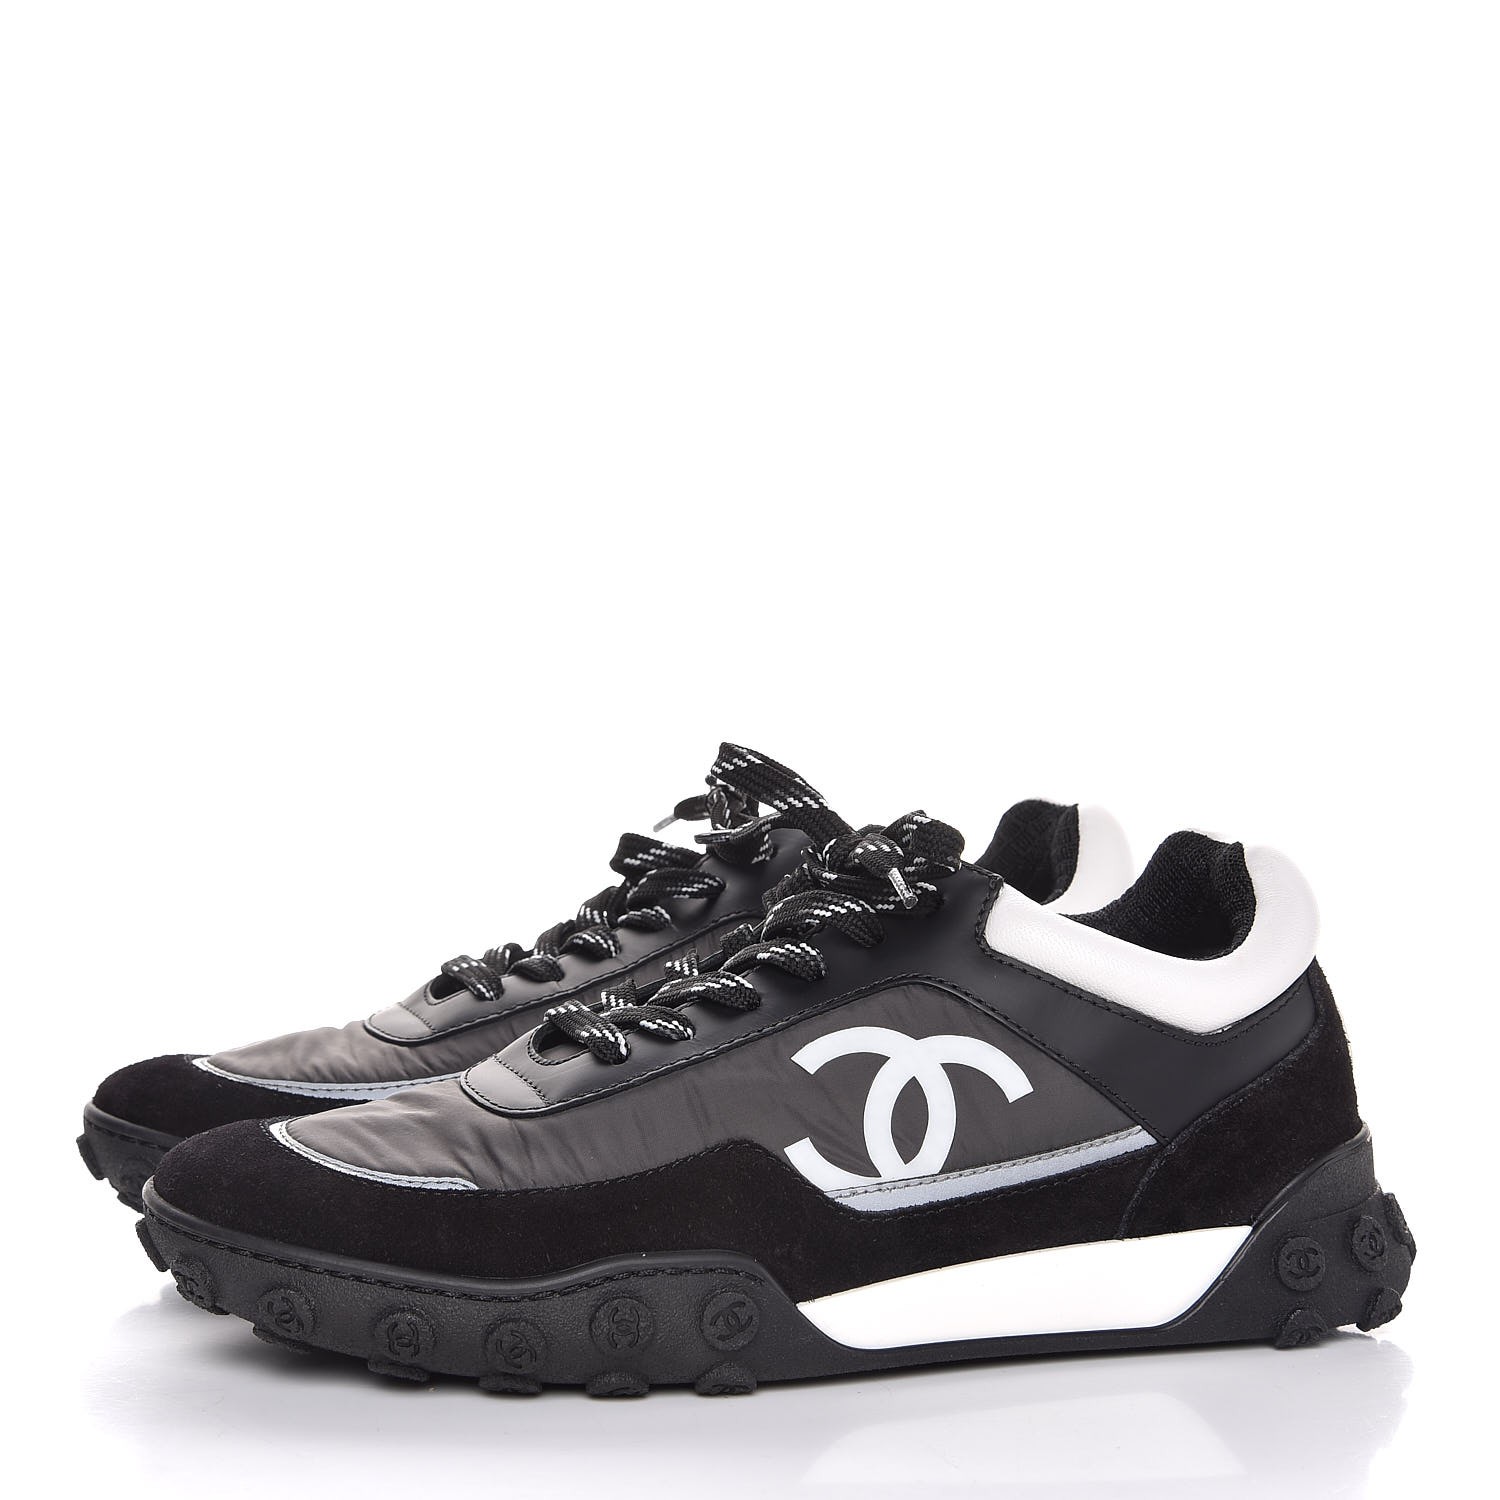 white and black chanel sneakers